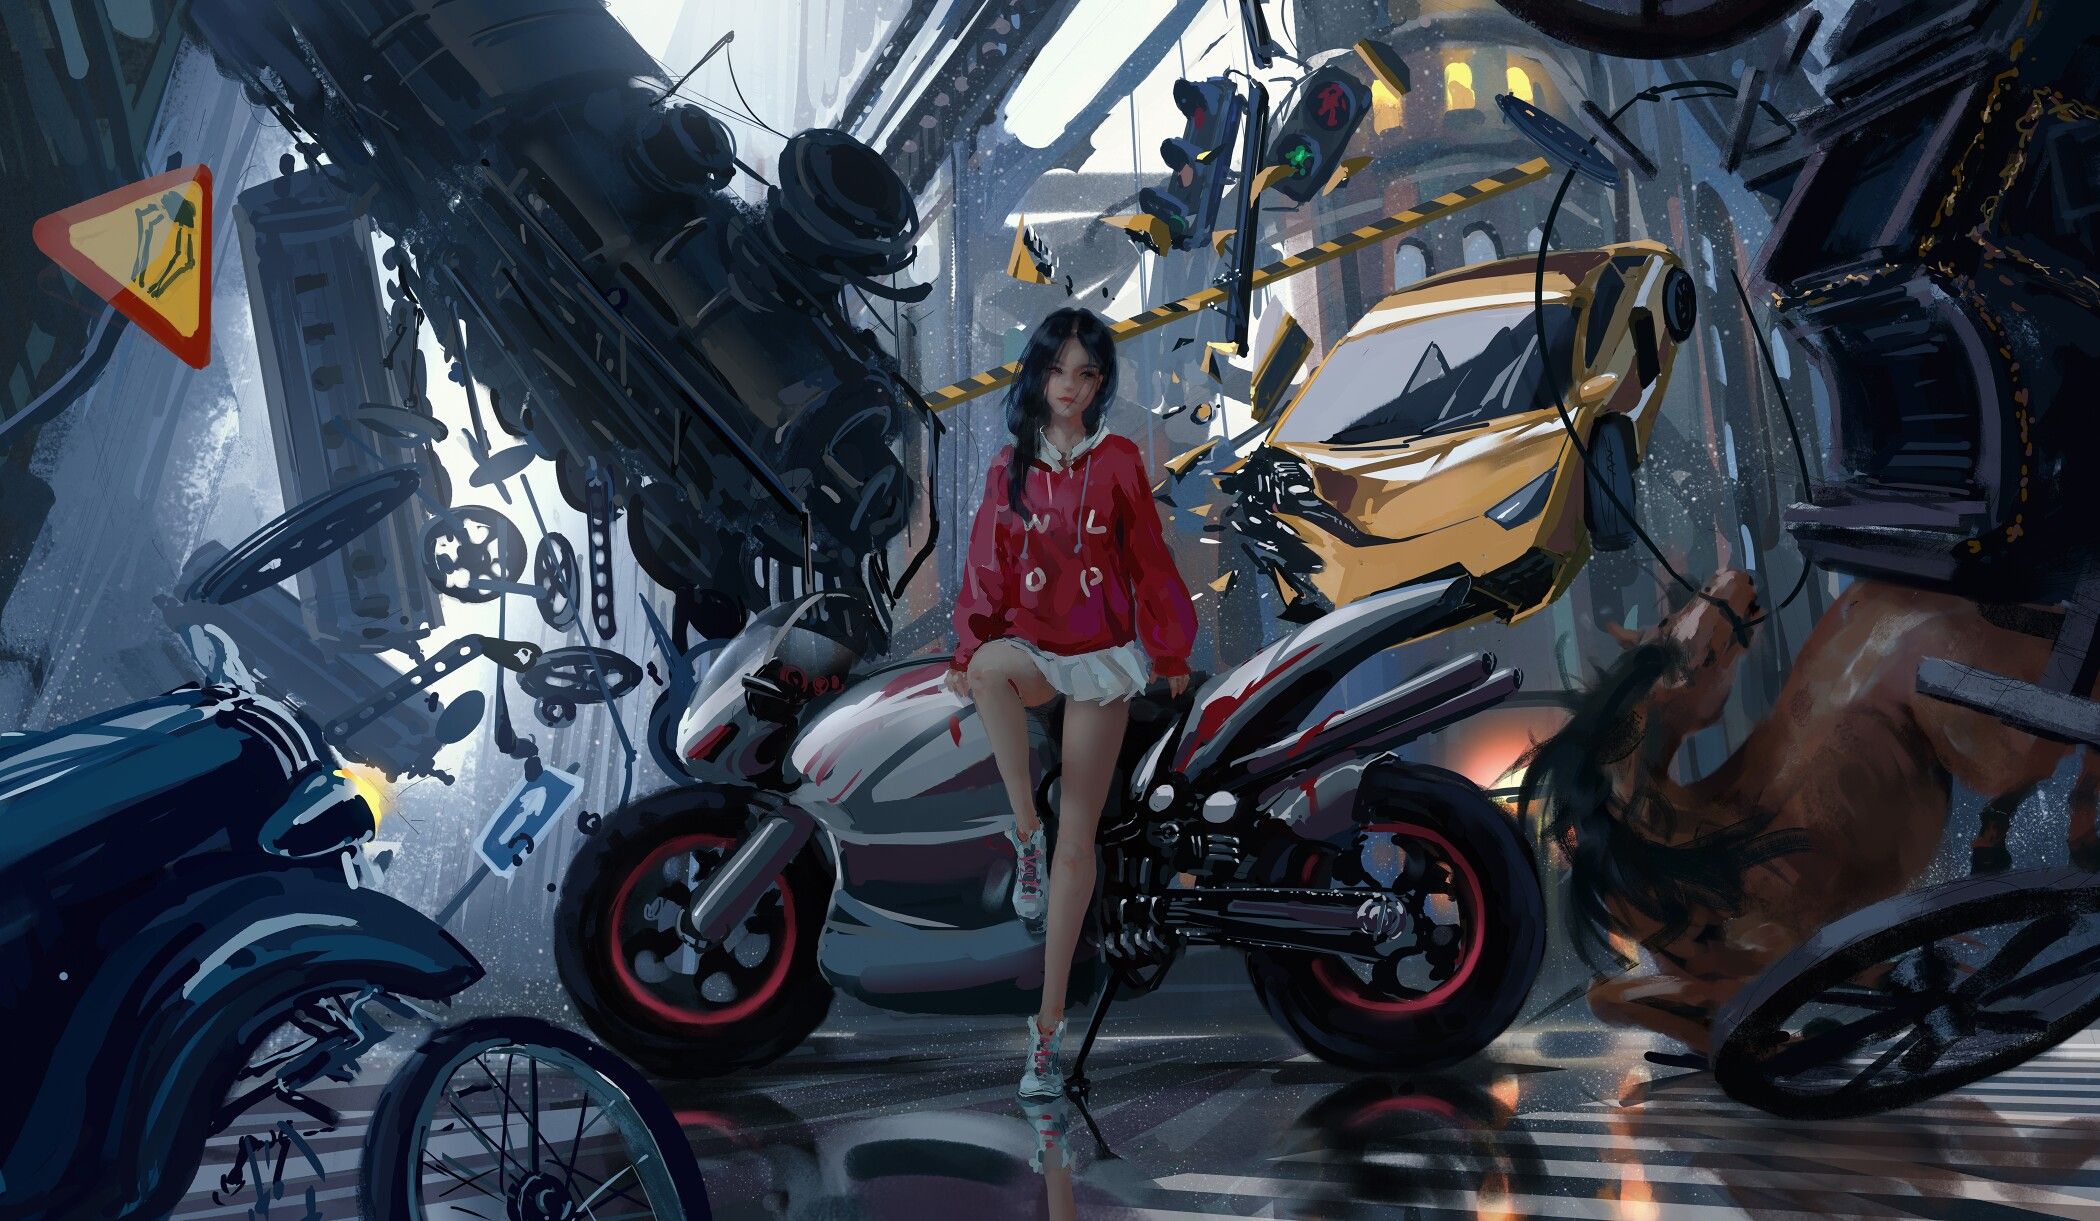 A cool 4K wallpaper of an anime girl leaning on a motorcycle